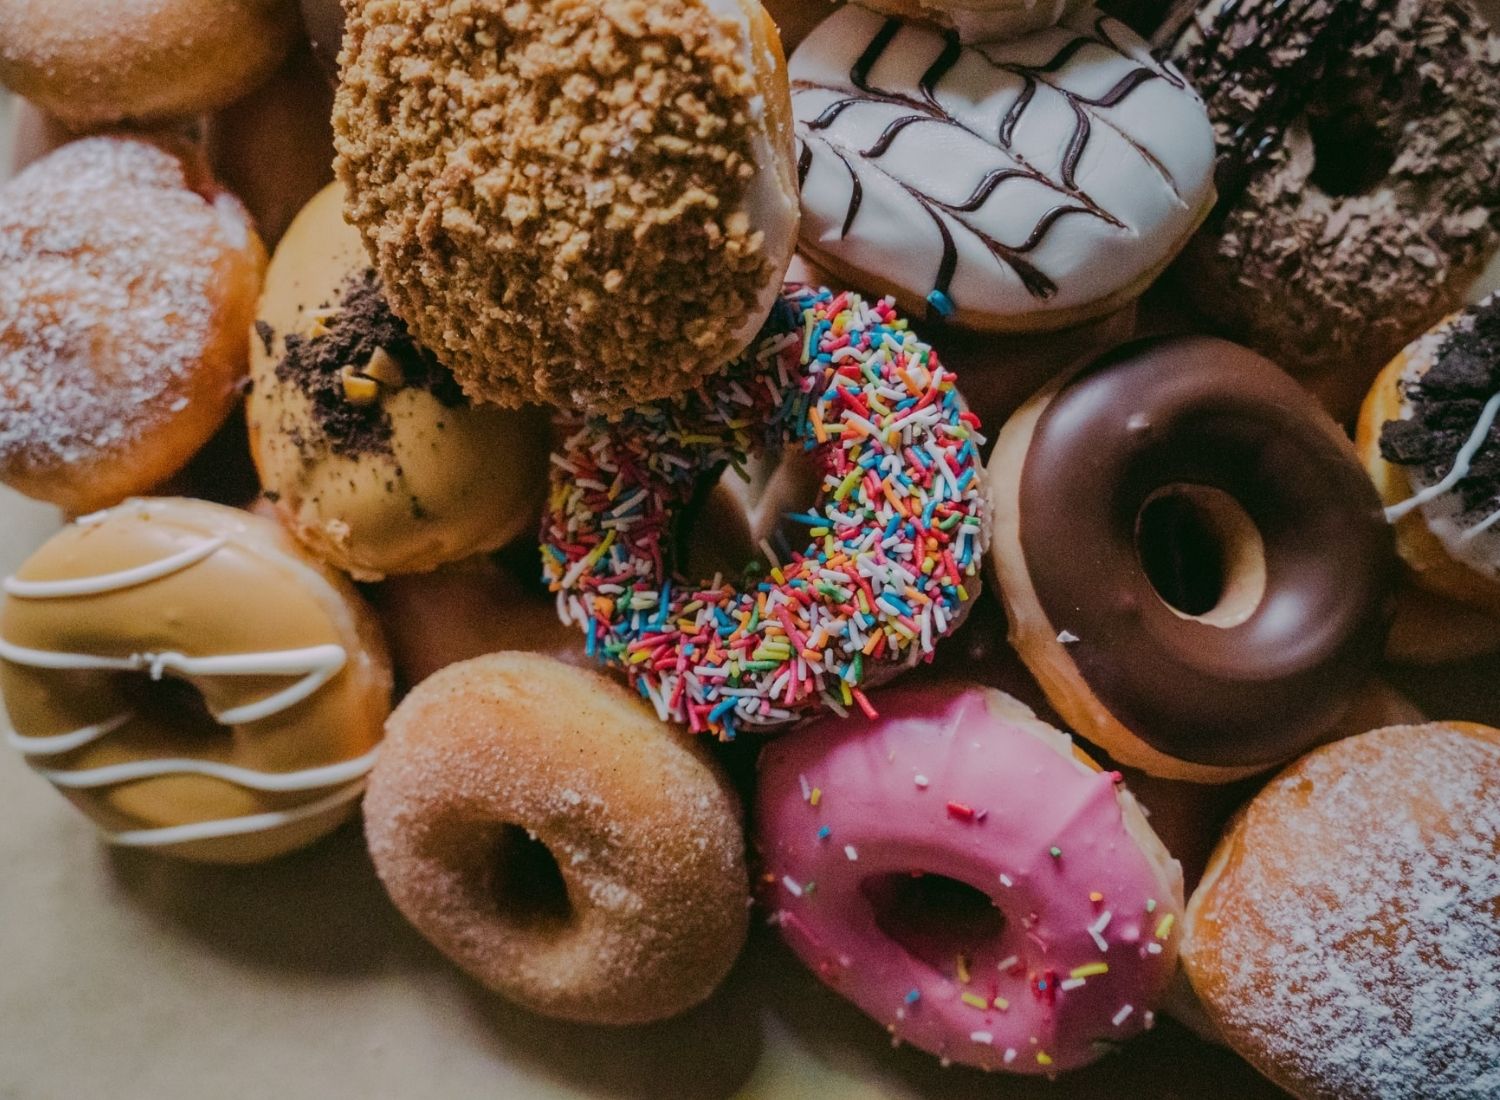 Is It Healthy To Eat Doughnuts?